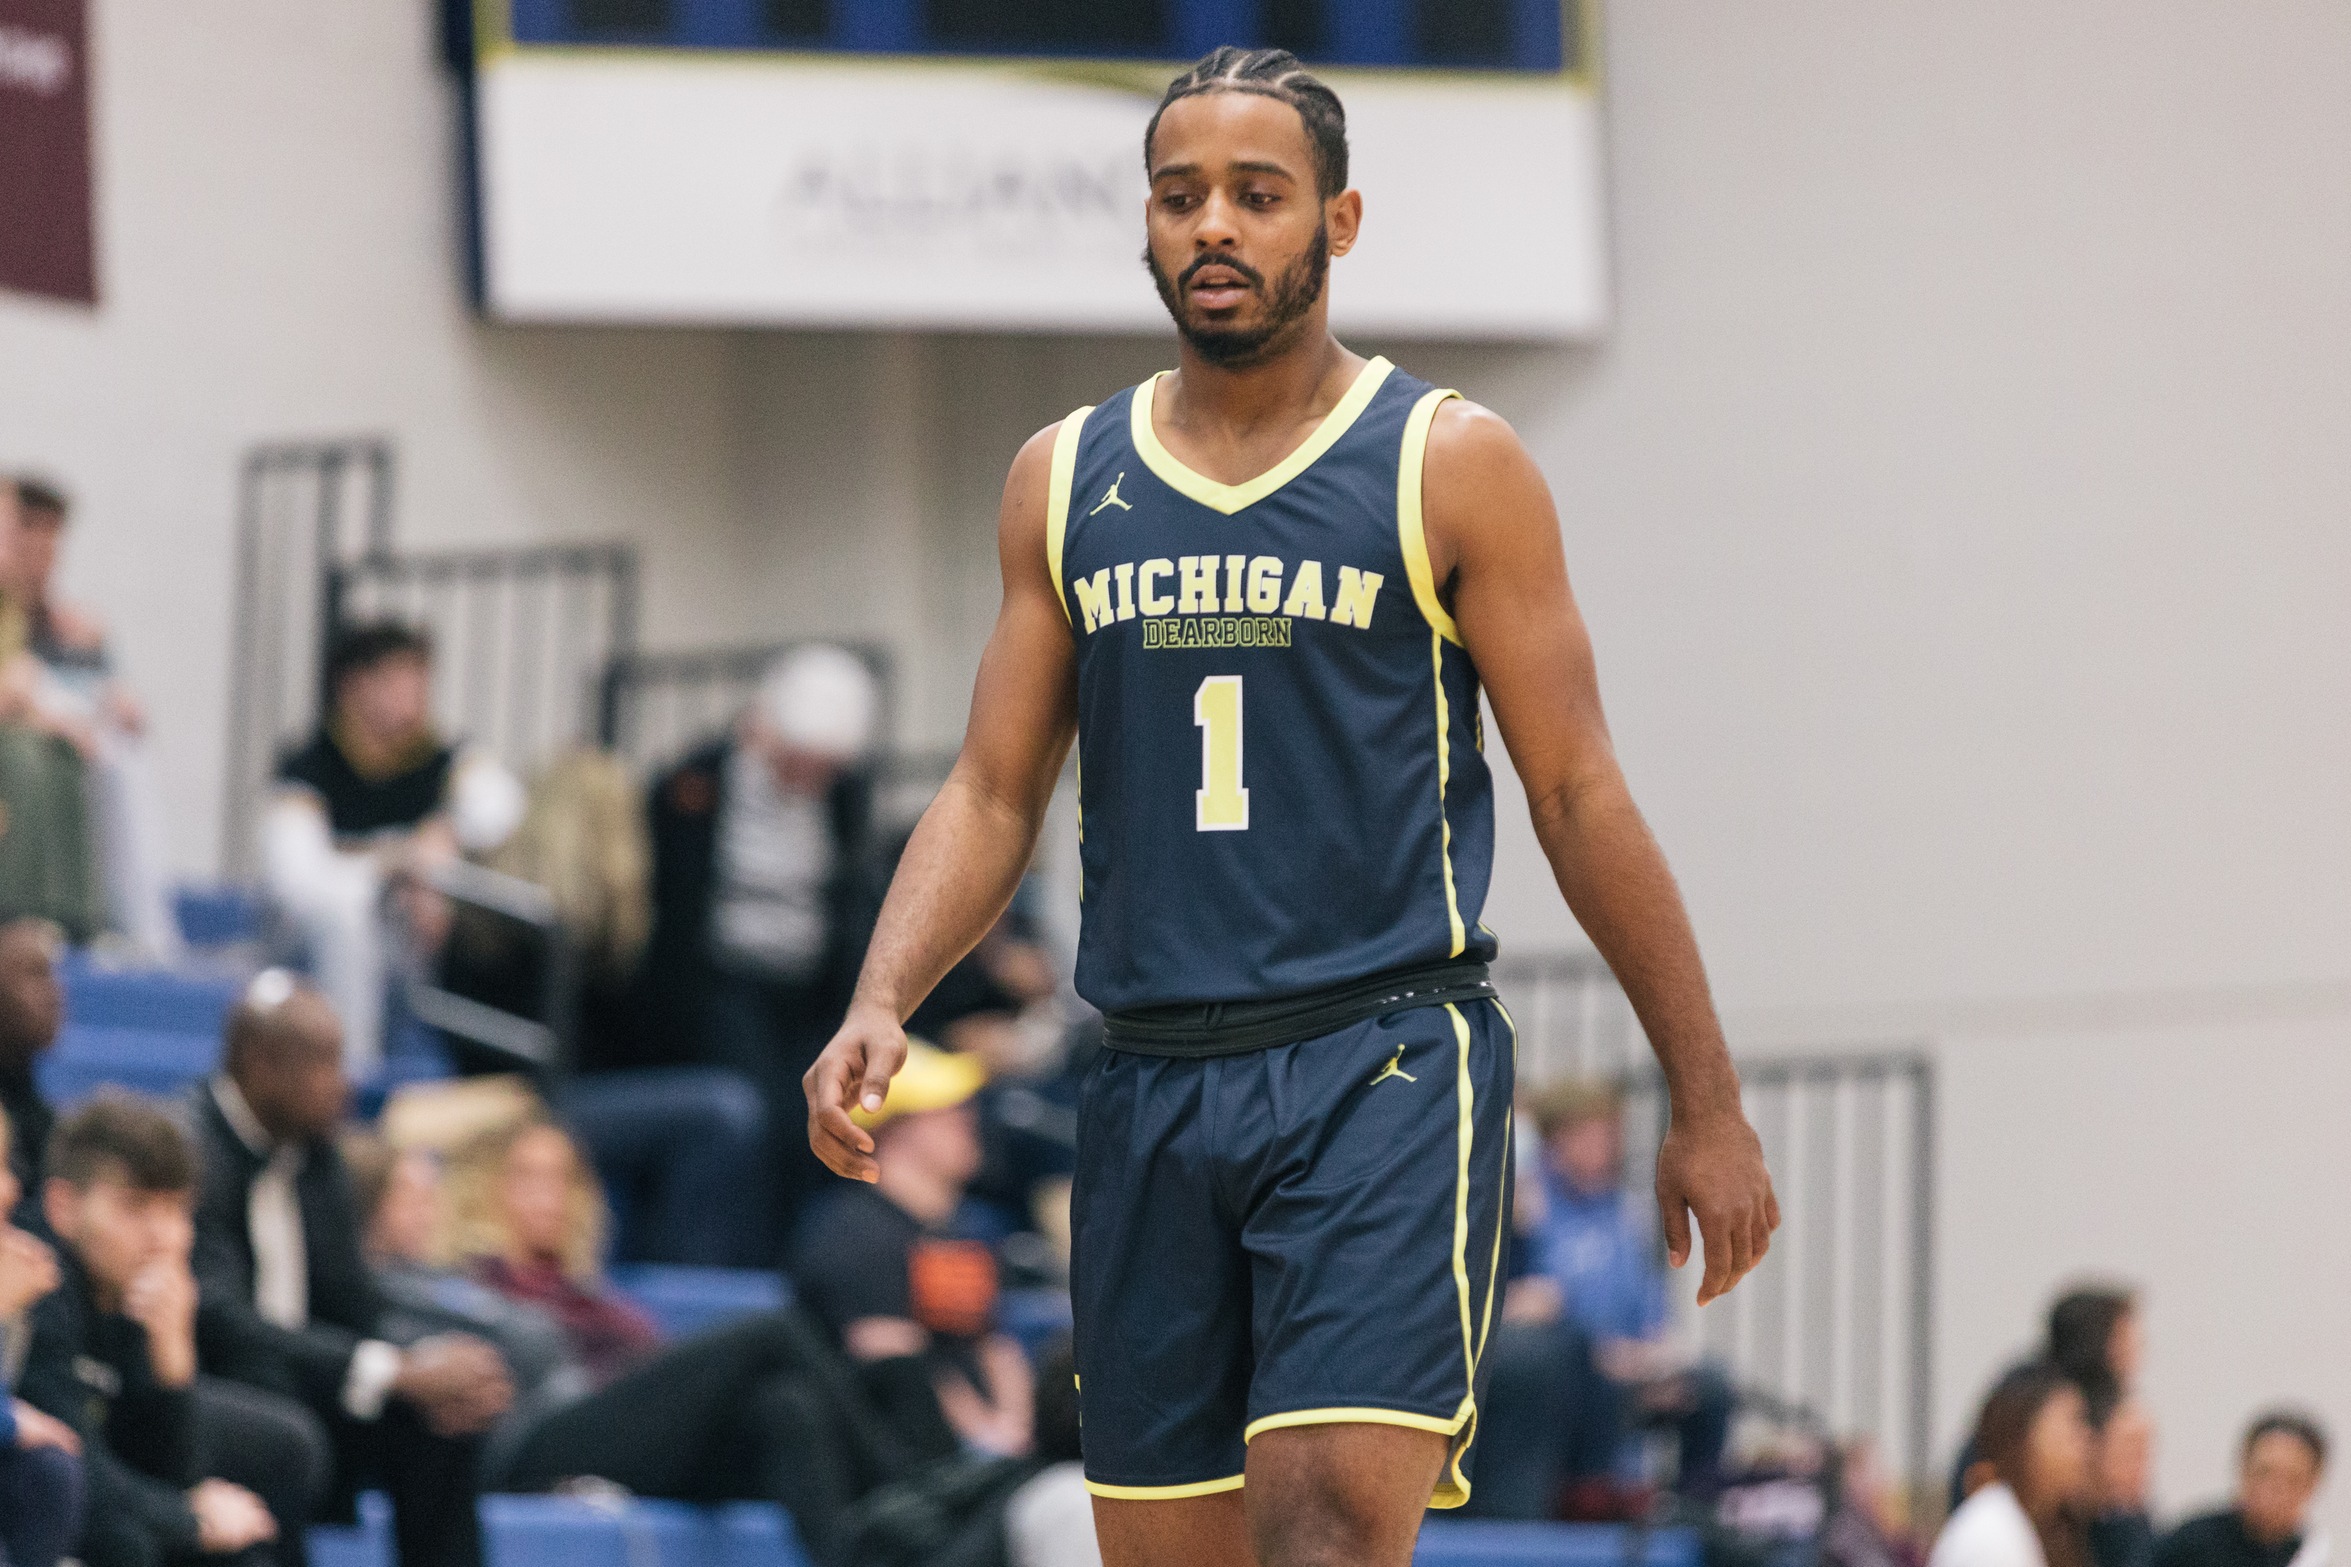 Hot Shooting Lifts Wolverines Over Penn State Schuylkill